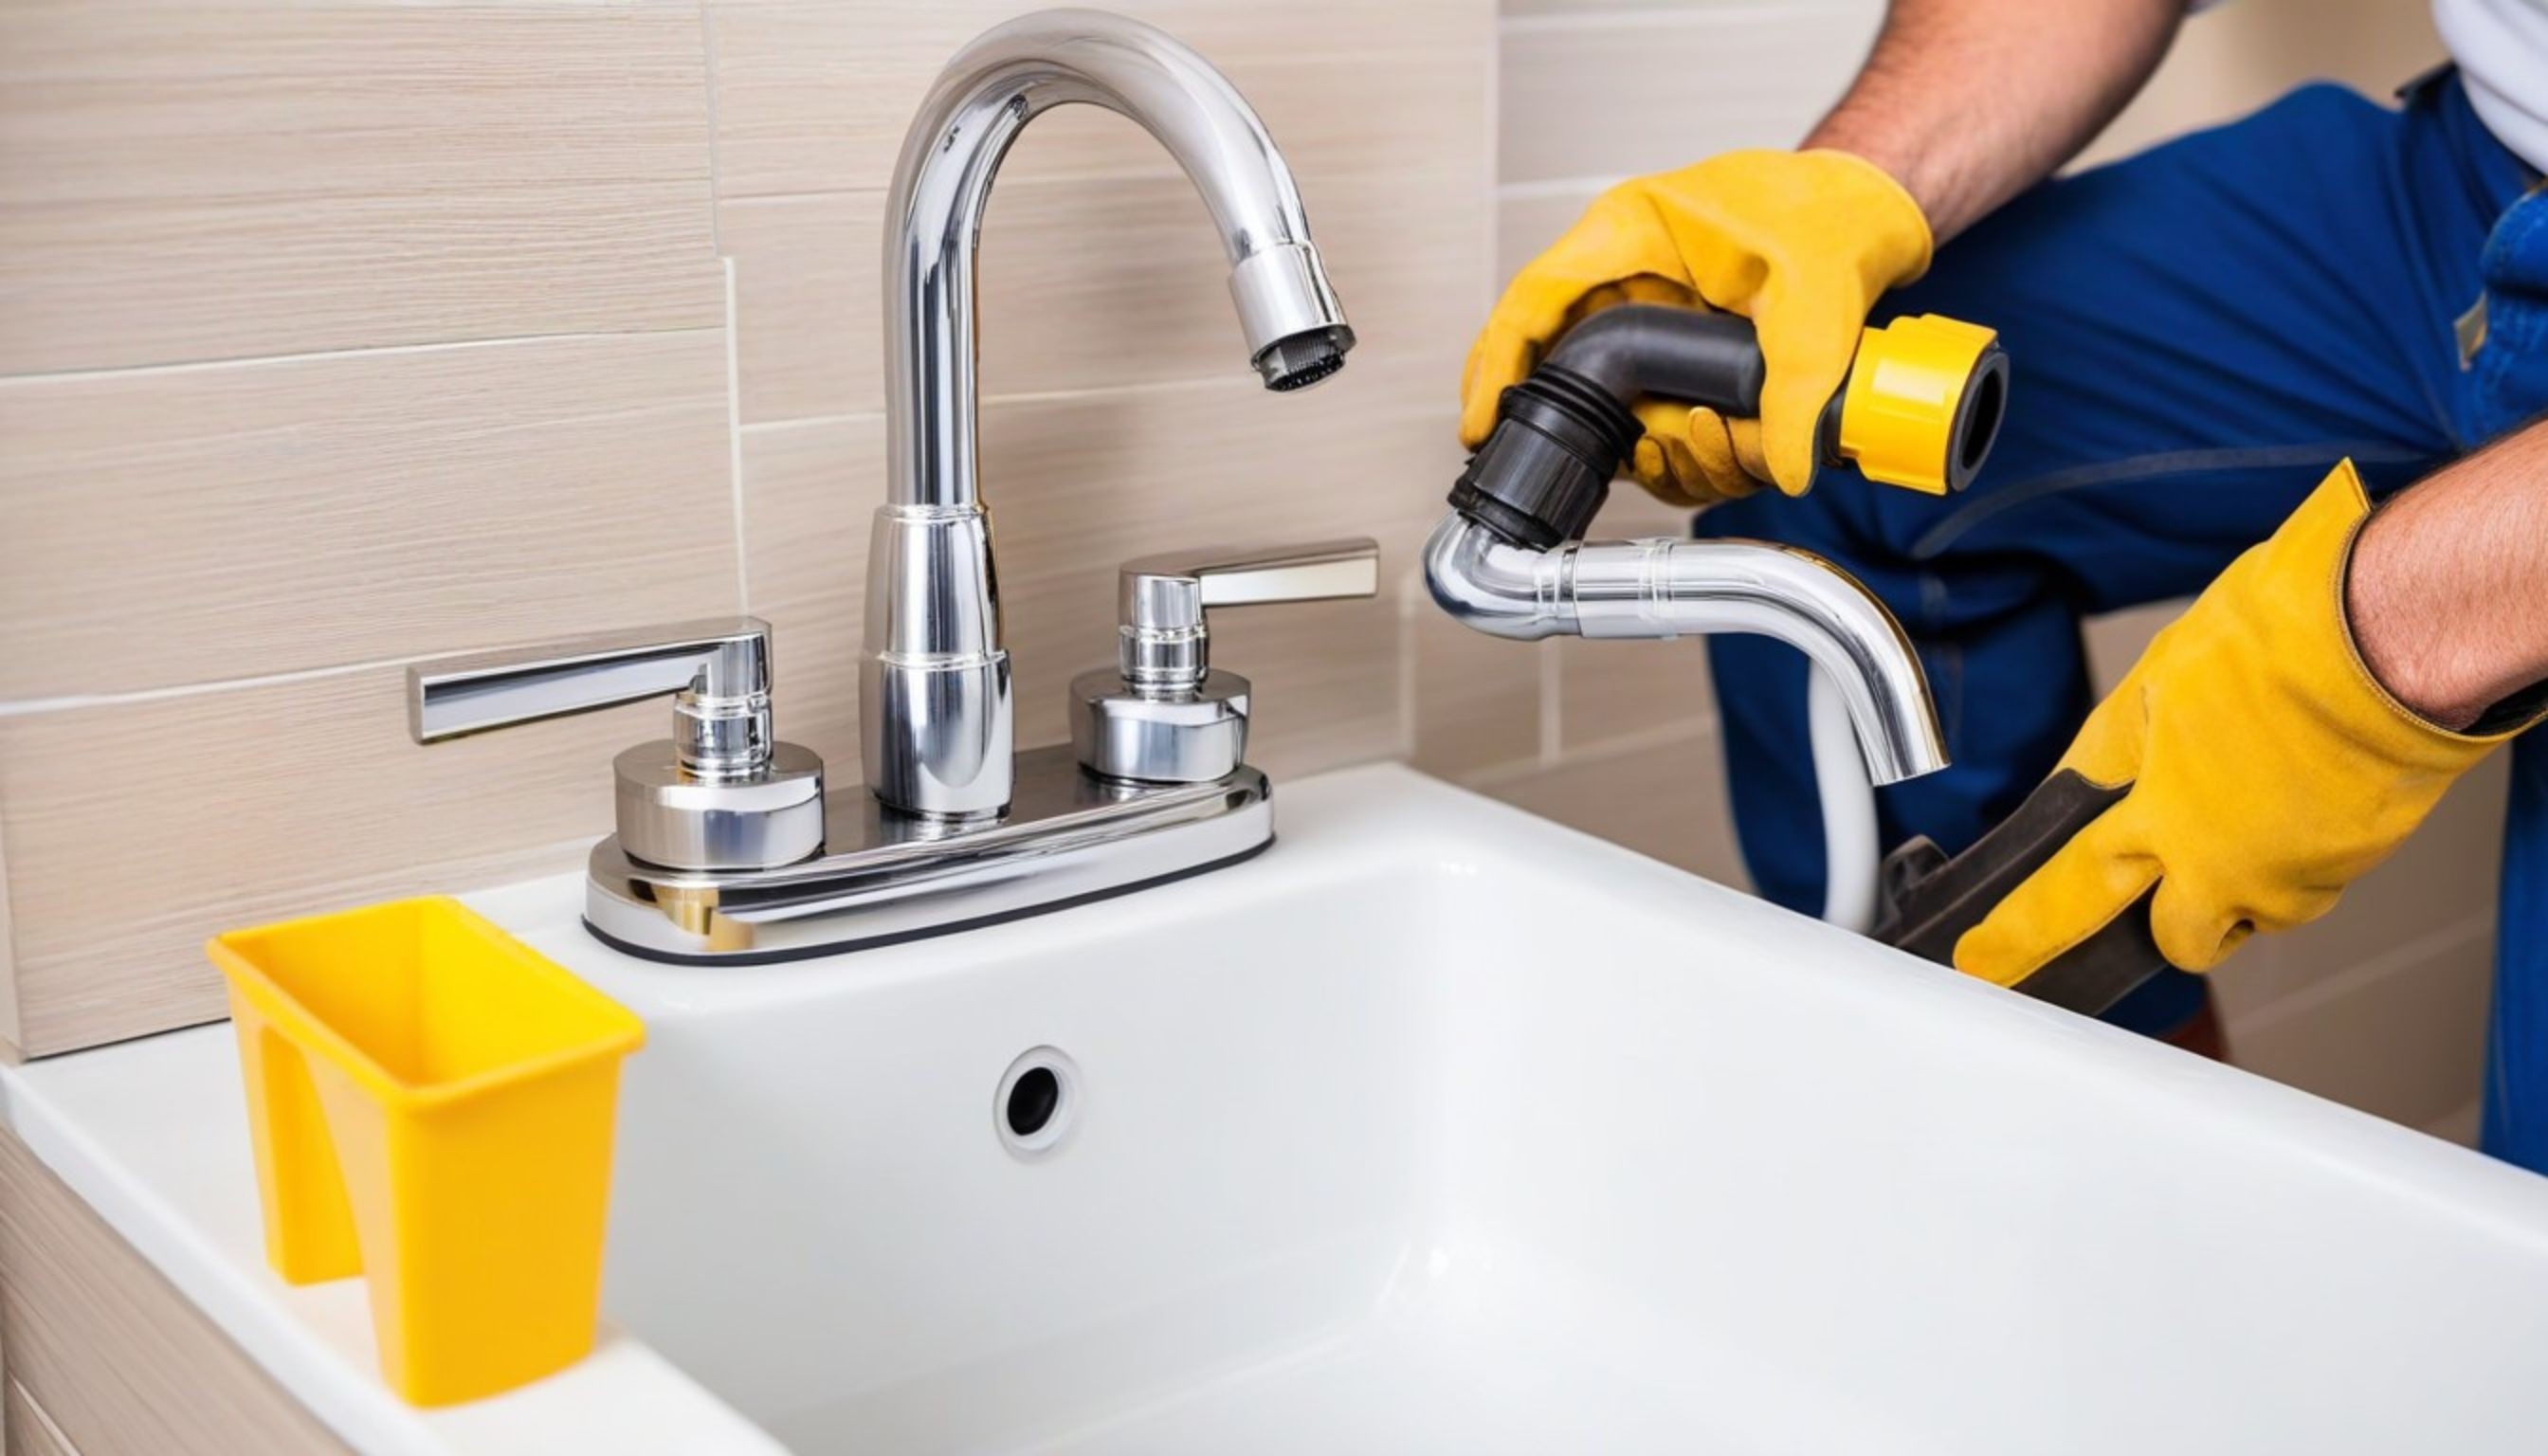 Residential Plumbing Services Near Me